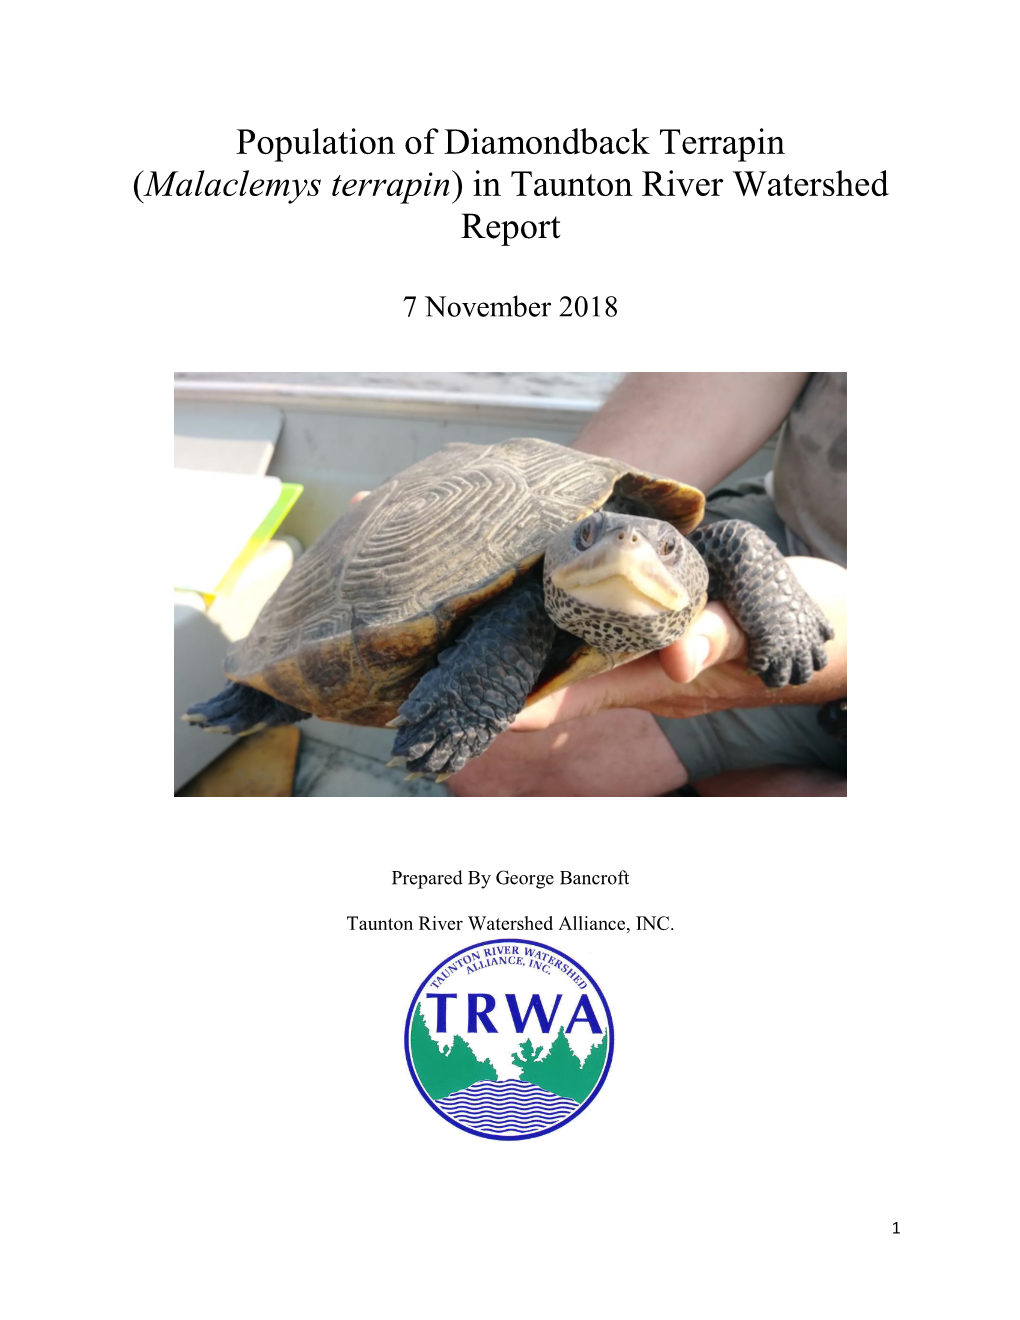 Malaclemys Terrapin) in Taunton River Watershed Report